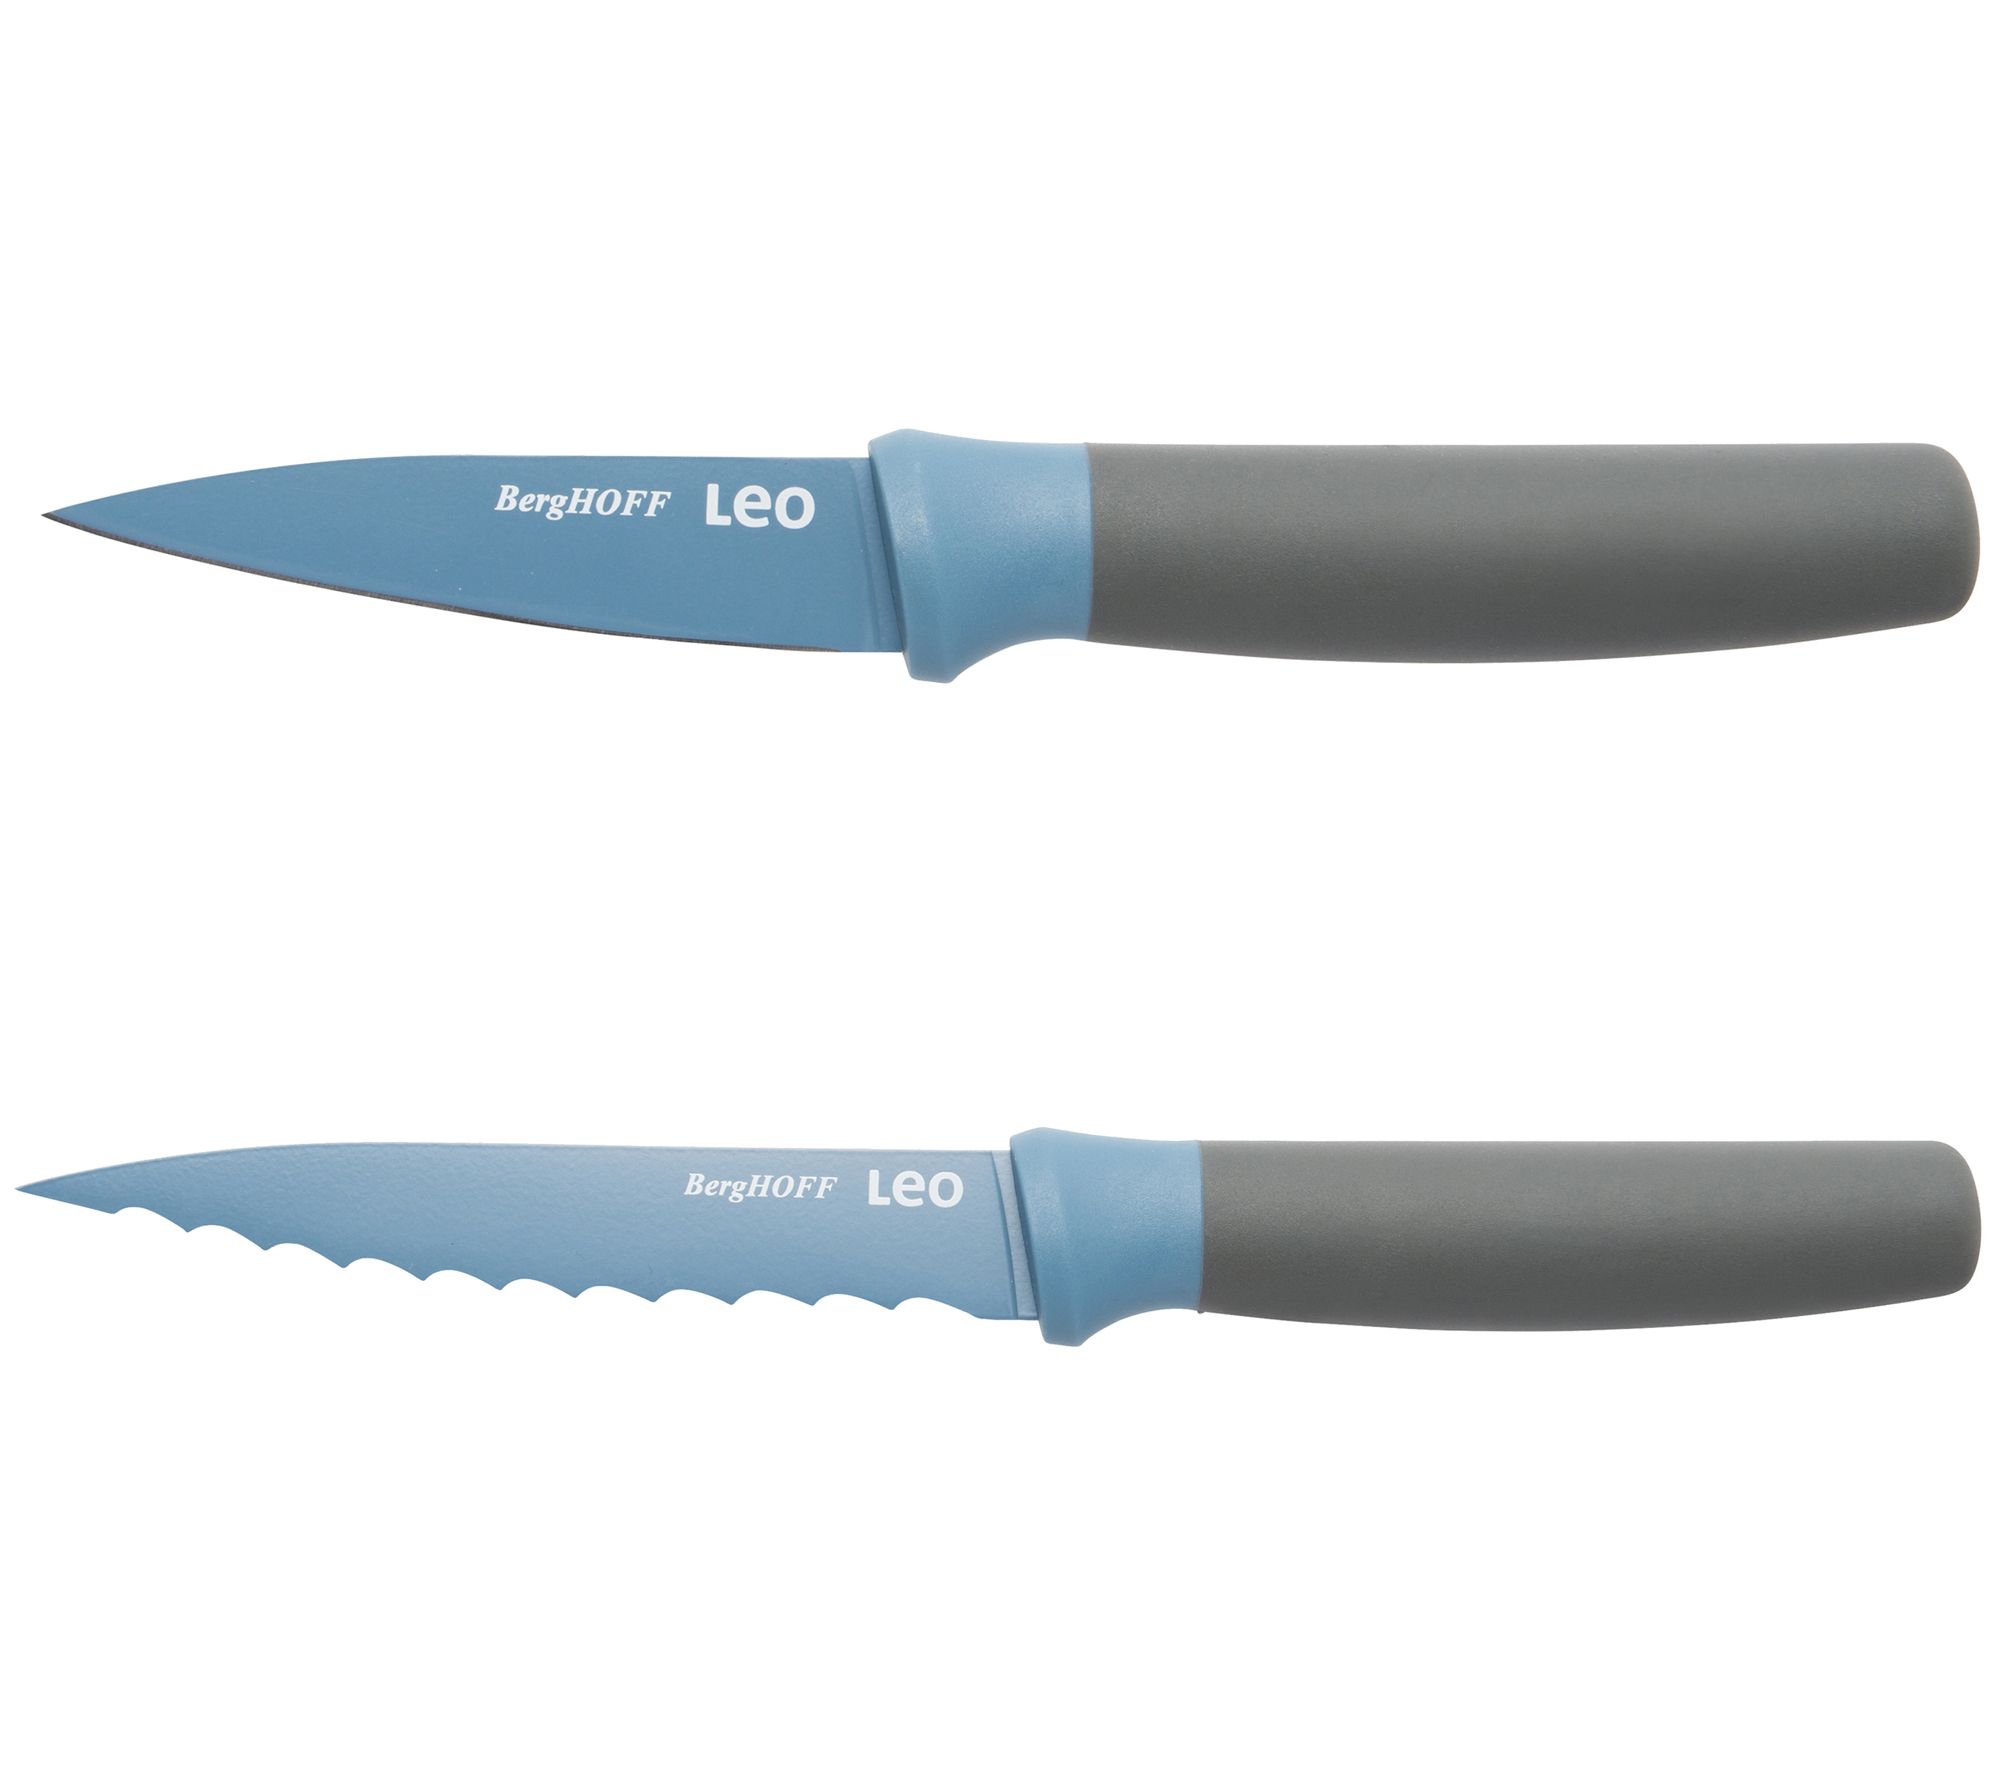 Stainless Steel Non-serrated Utility Knife and Paring Knife 2pc